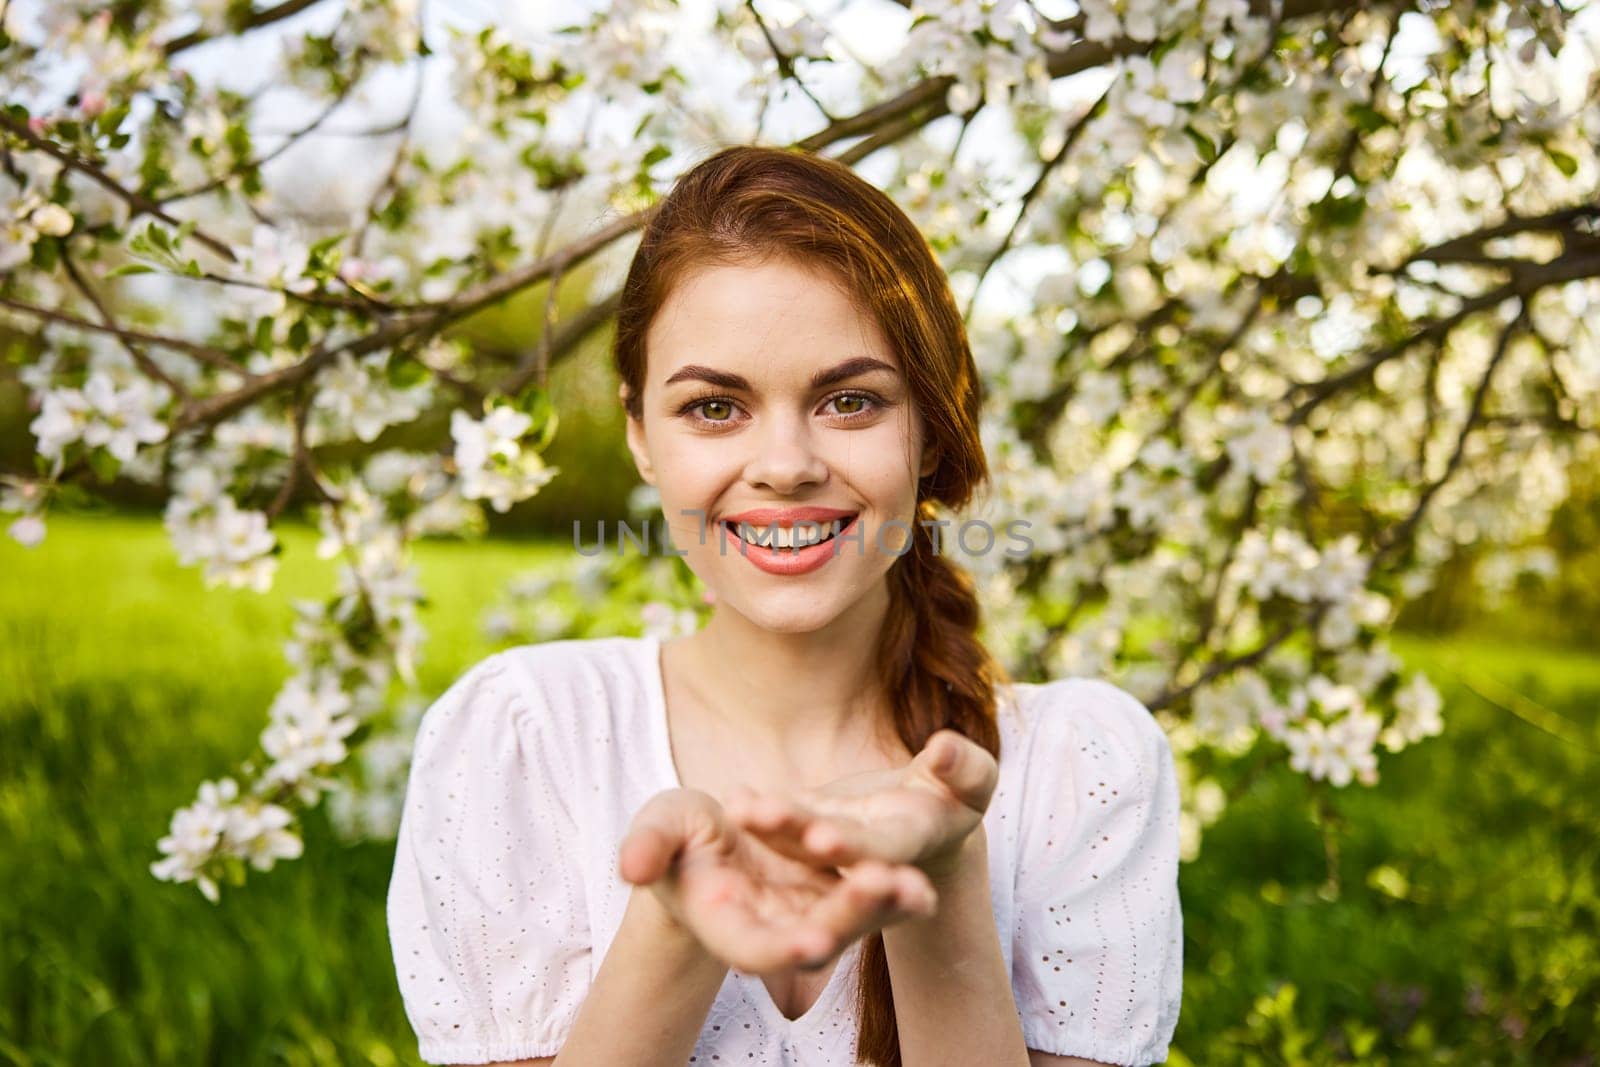 openly smiling woman against the backdrop of a flowering tree stretches her palms to the camera. High quality photo